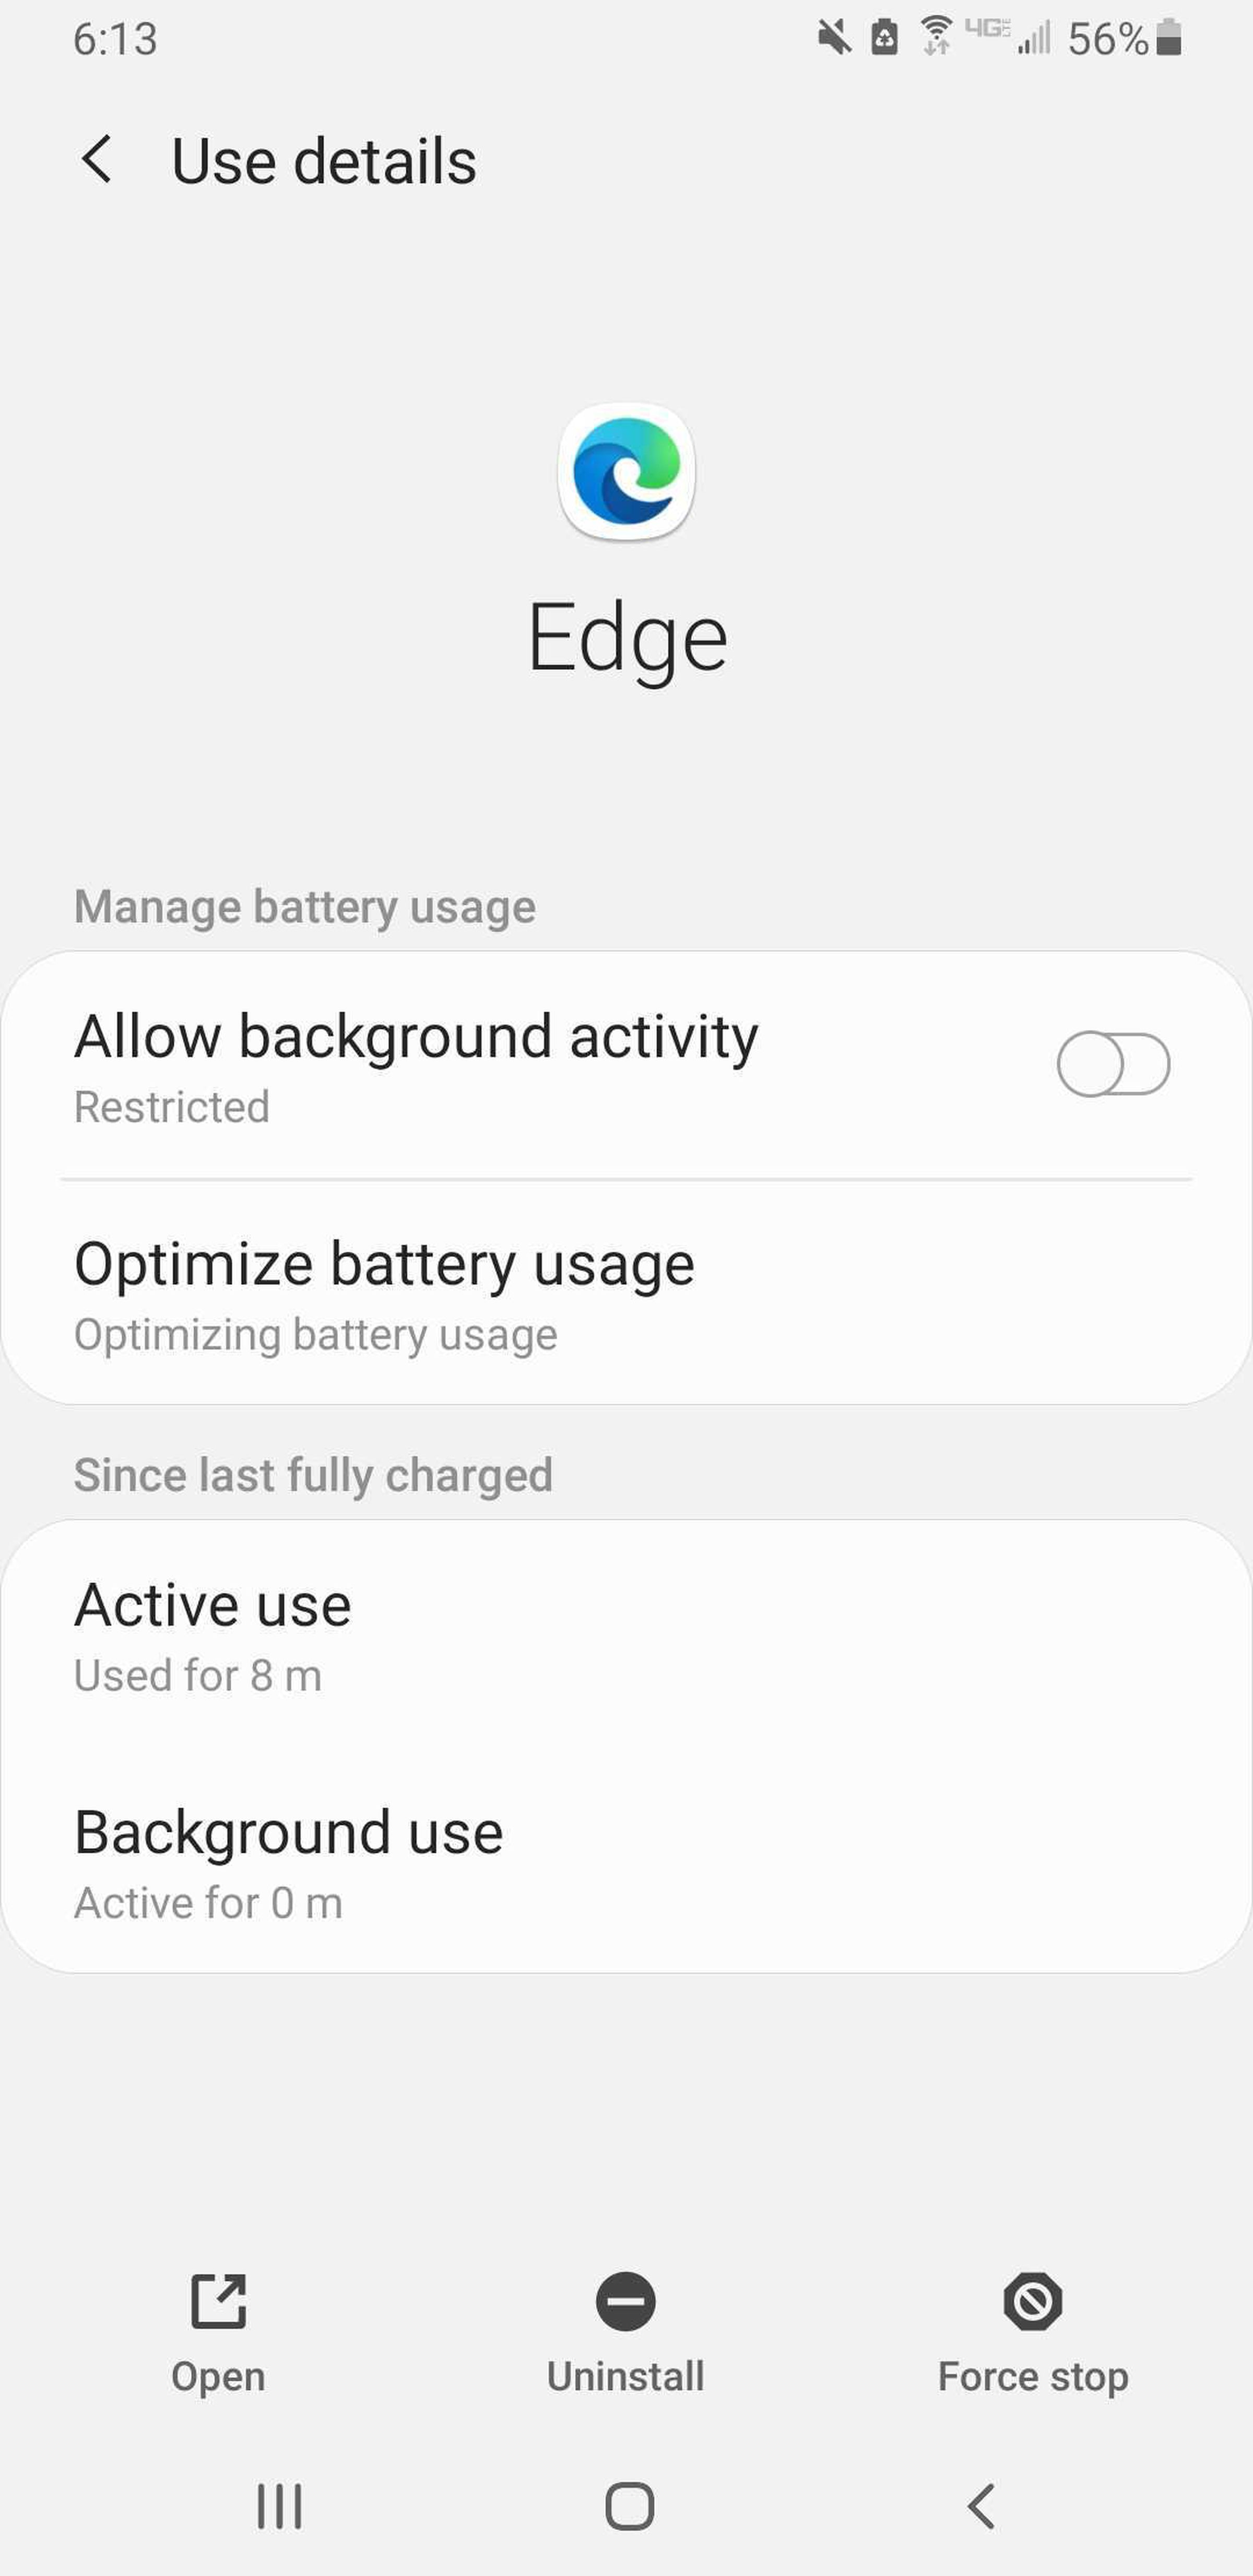 Toggle off “Allow background activity.”